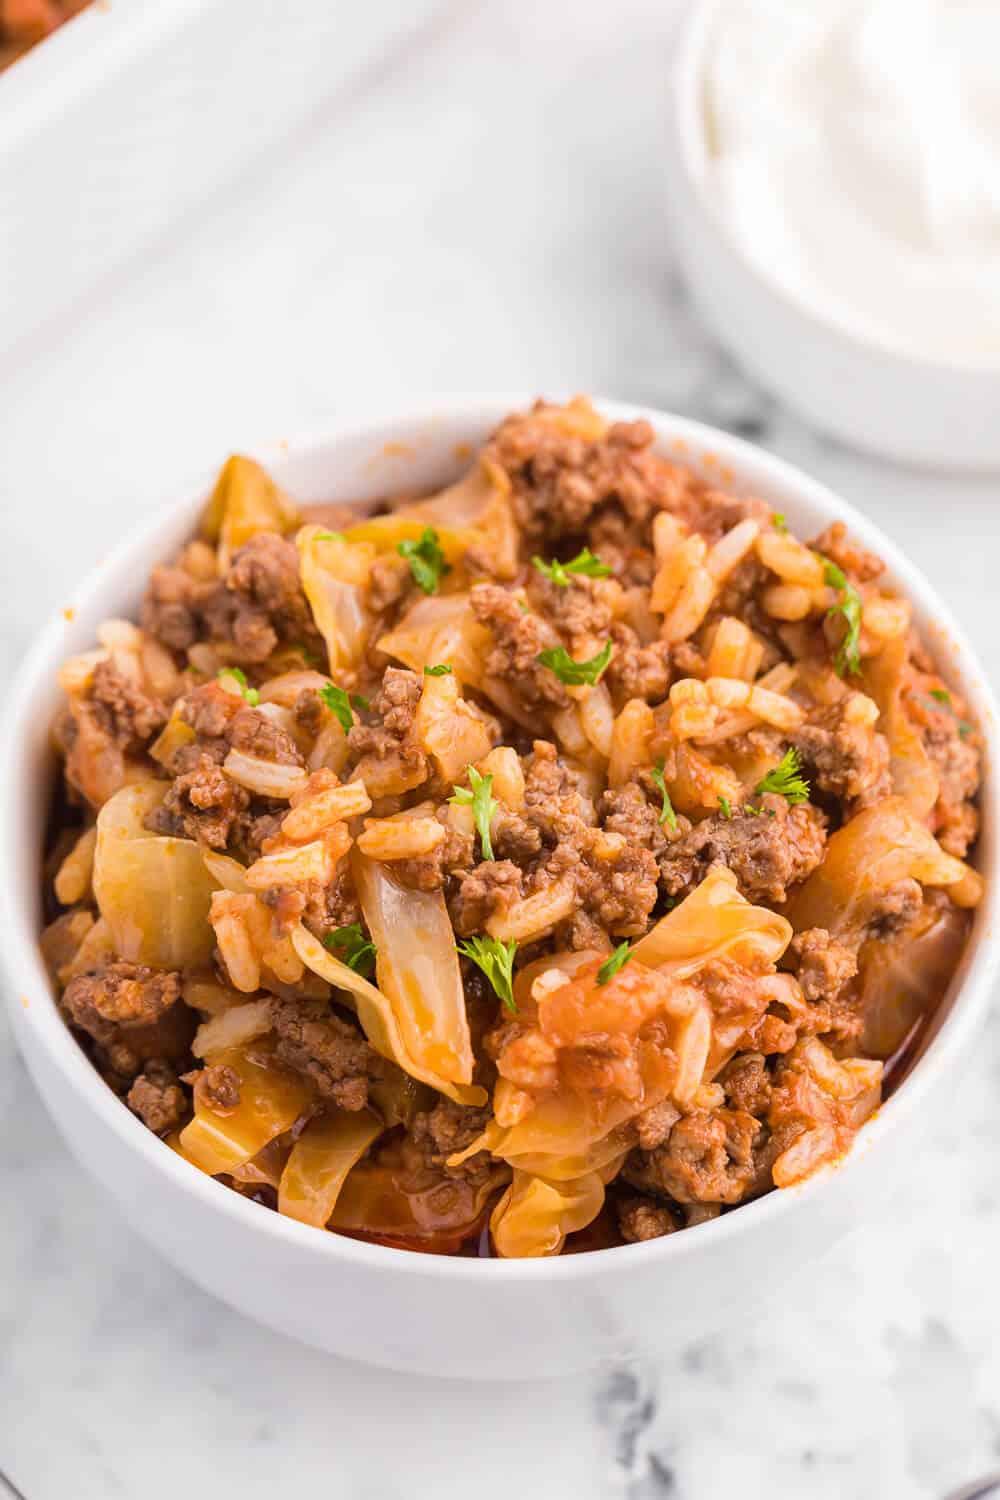 Cabbage roll casserole in a white bowl.